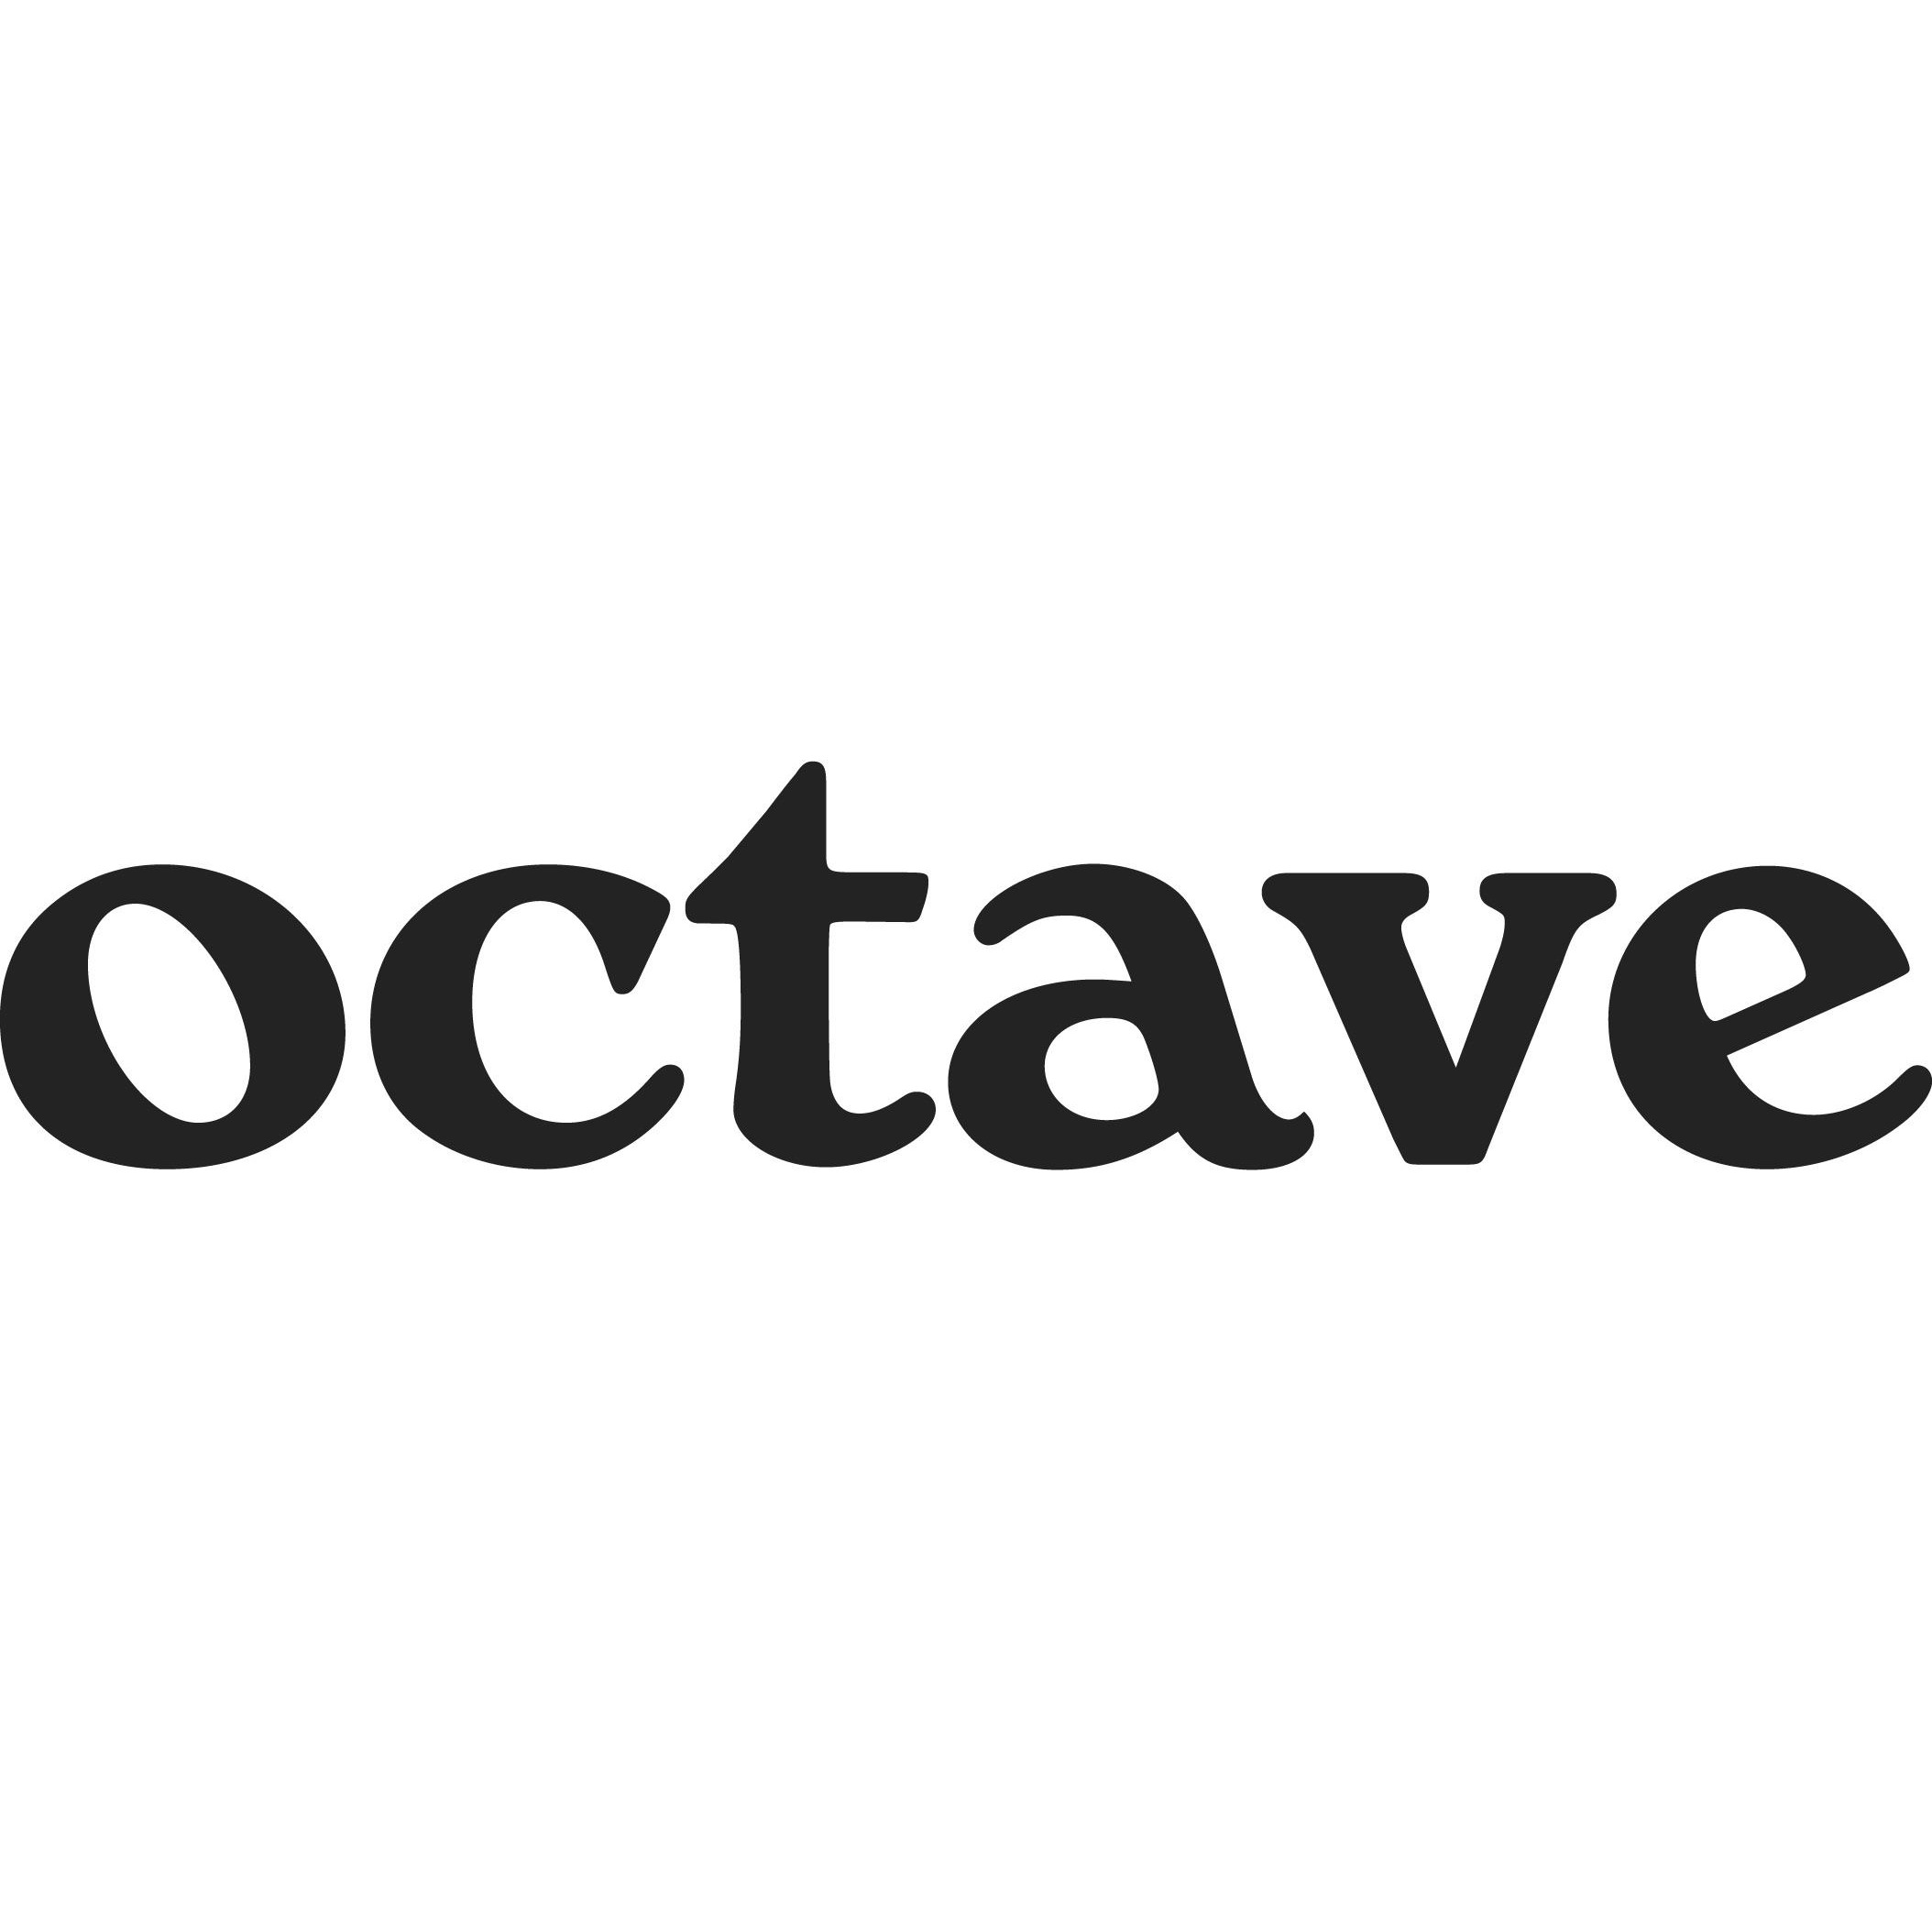 Octave - Coming Soon Logo